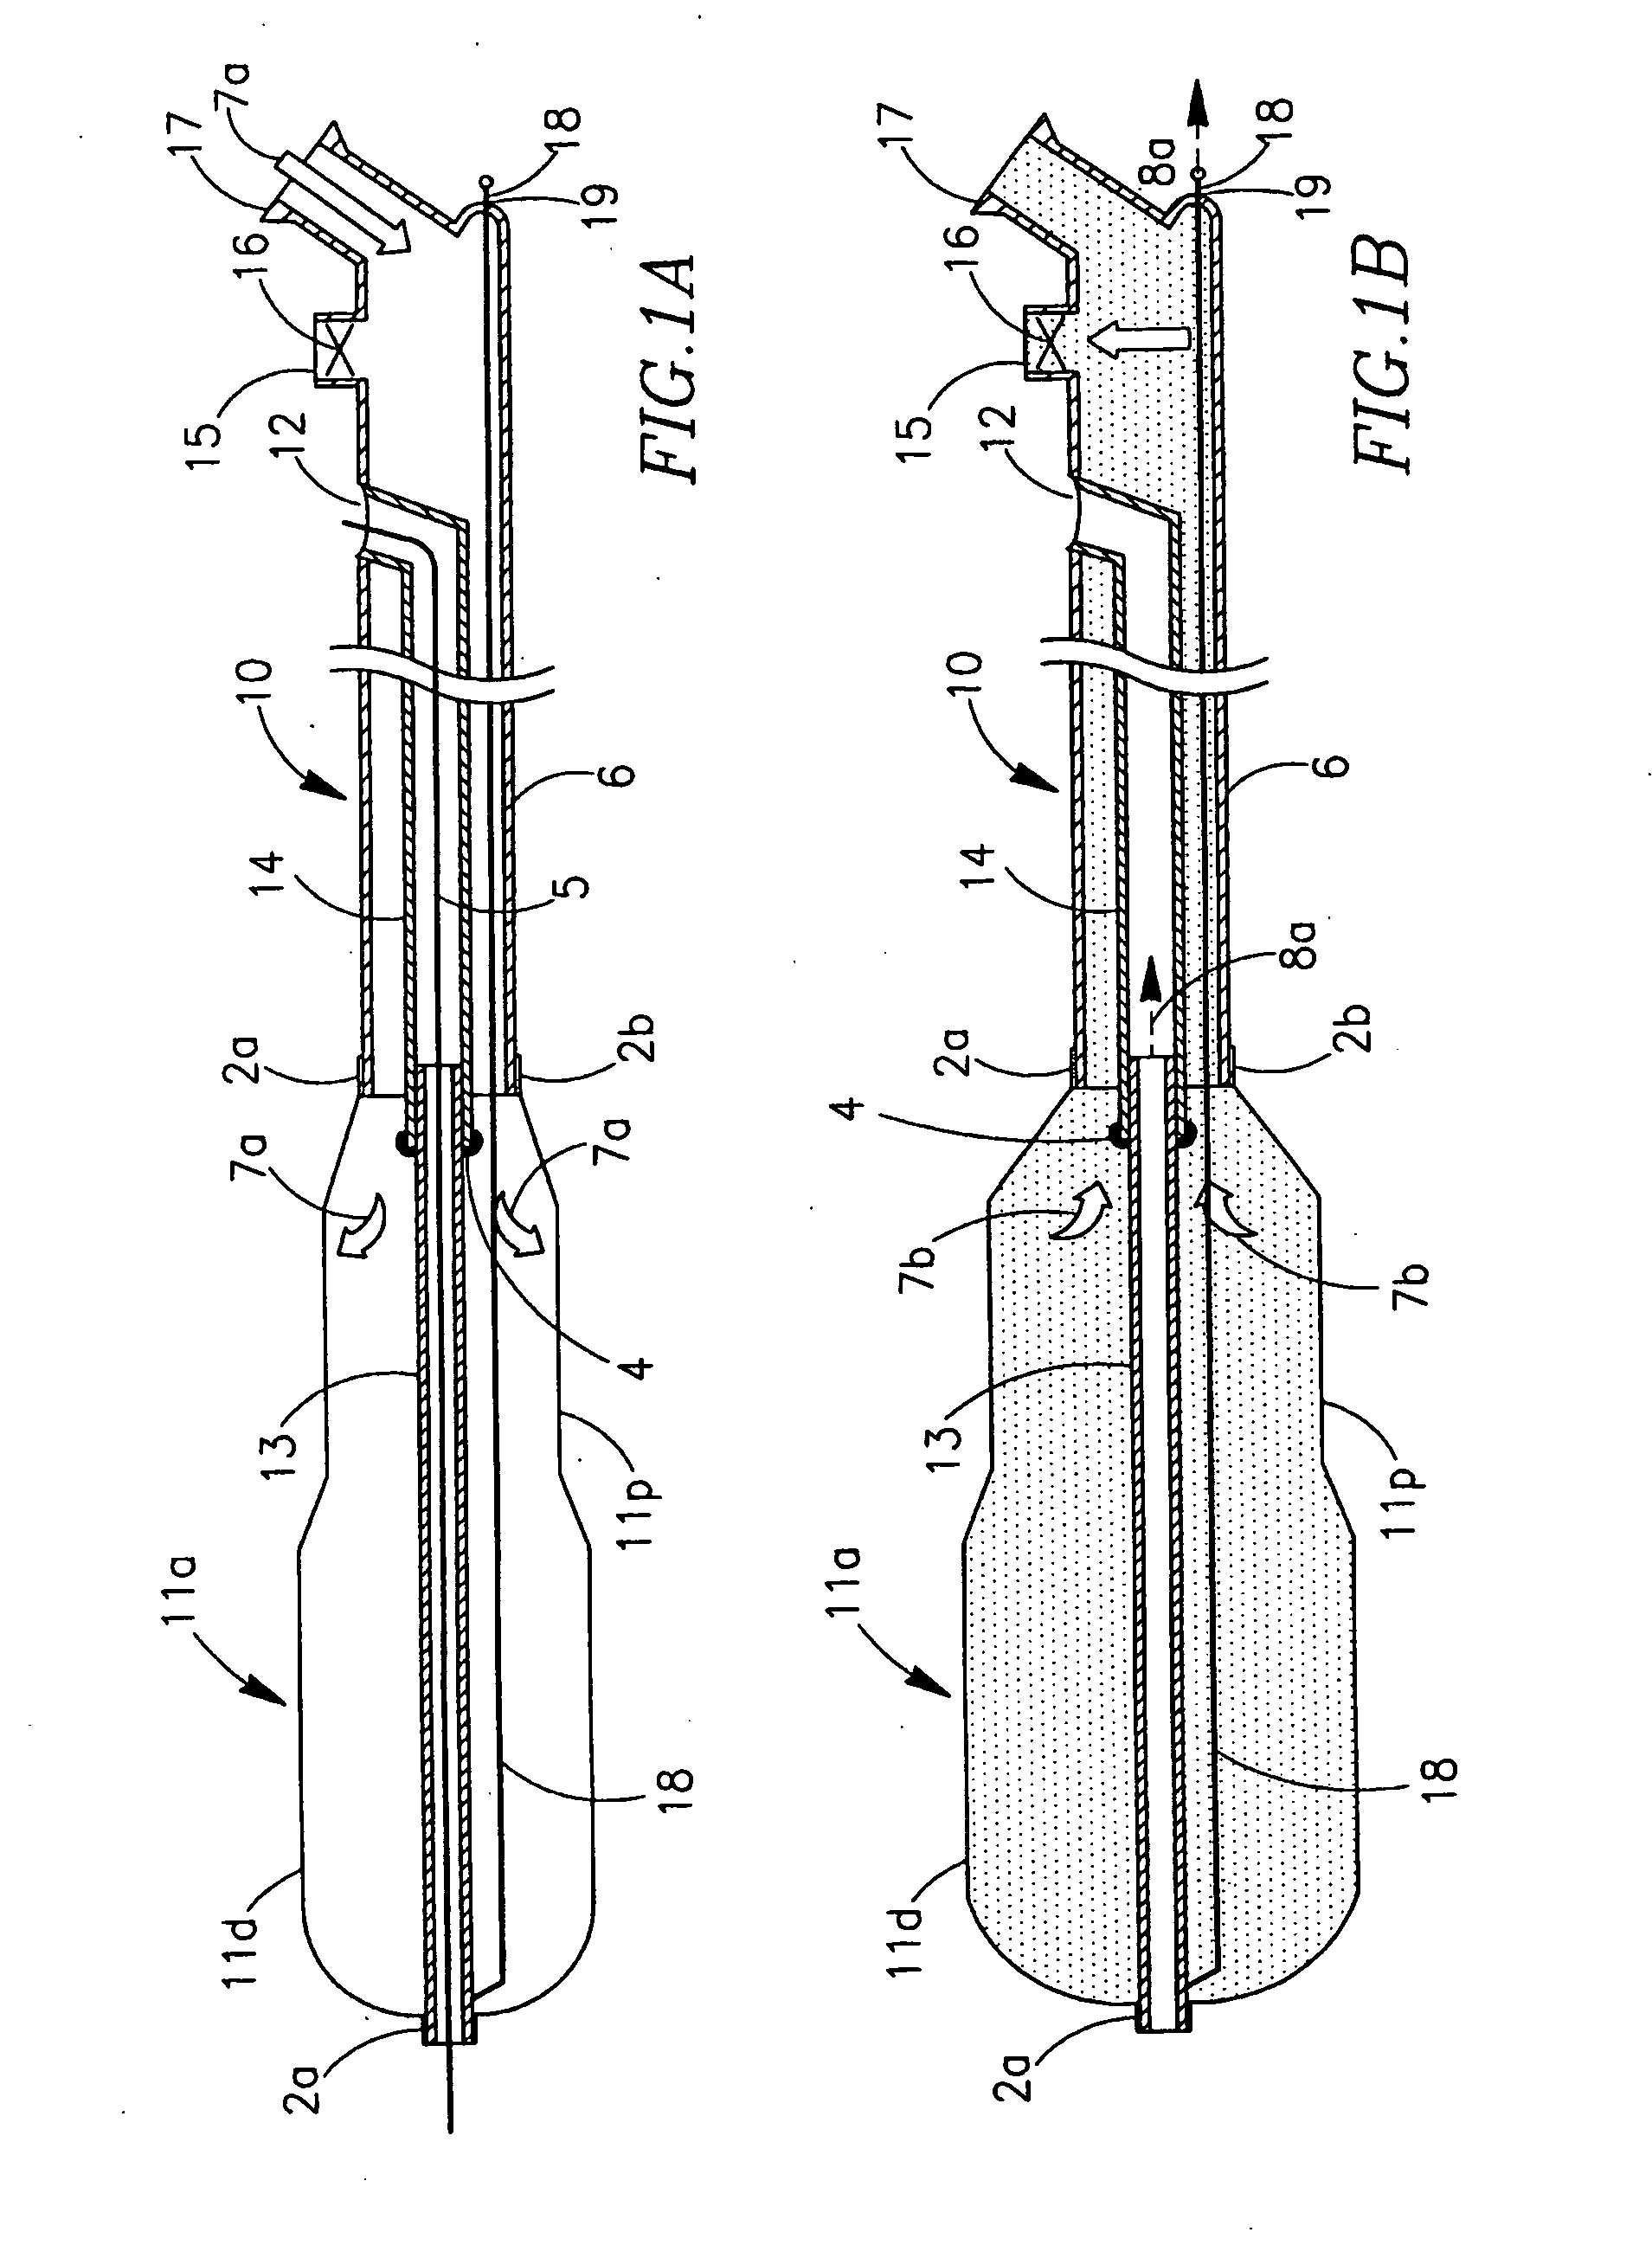 Intussuscepting balloon catheter and methods for constructing and using thereof